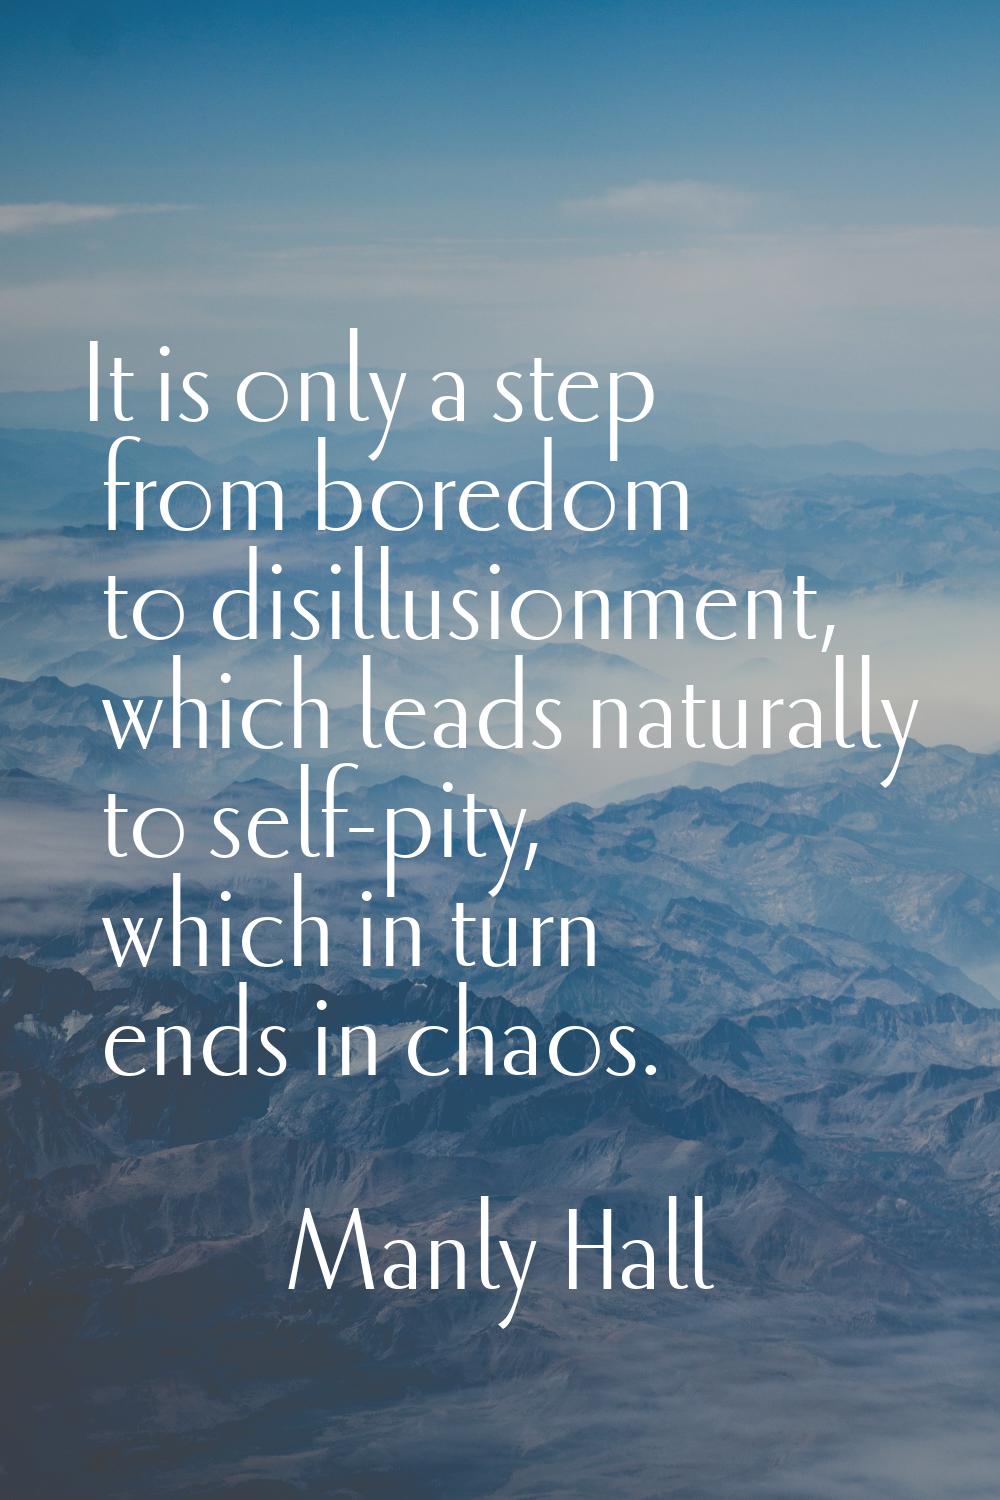 It is only a step from boredom to disillusionment, which leads naturally to self-pity, which in tur